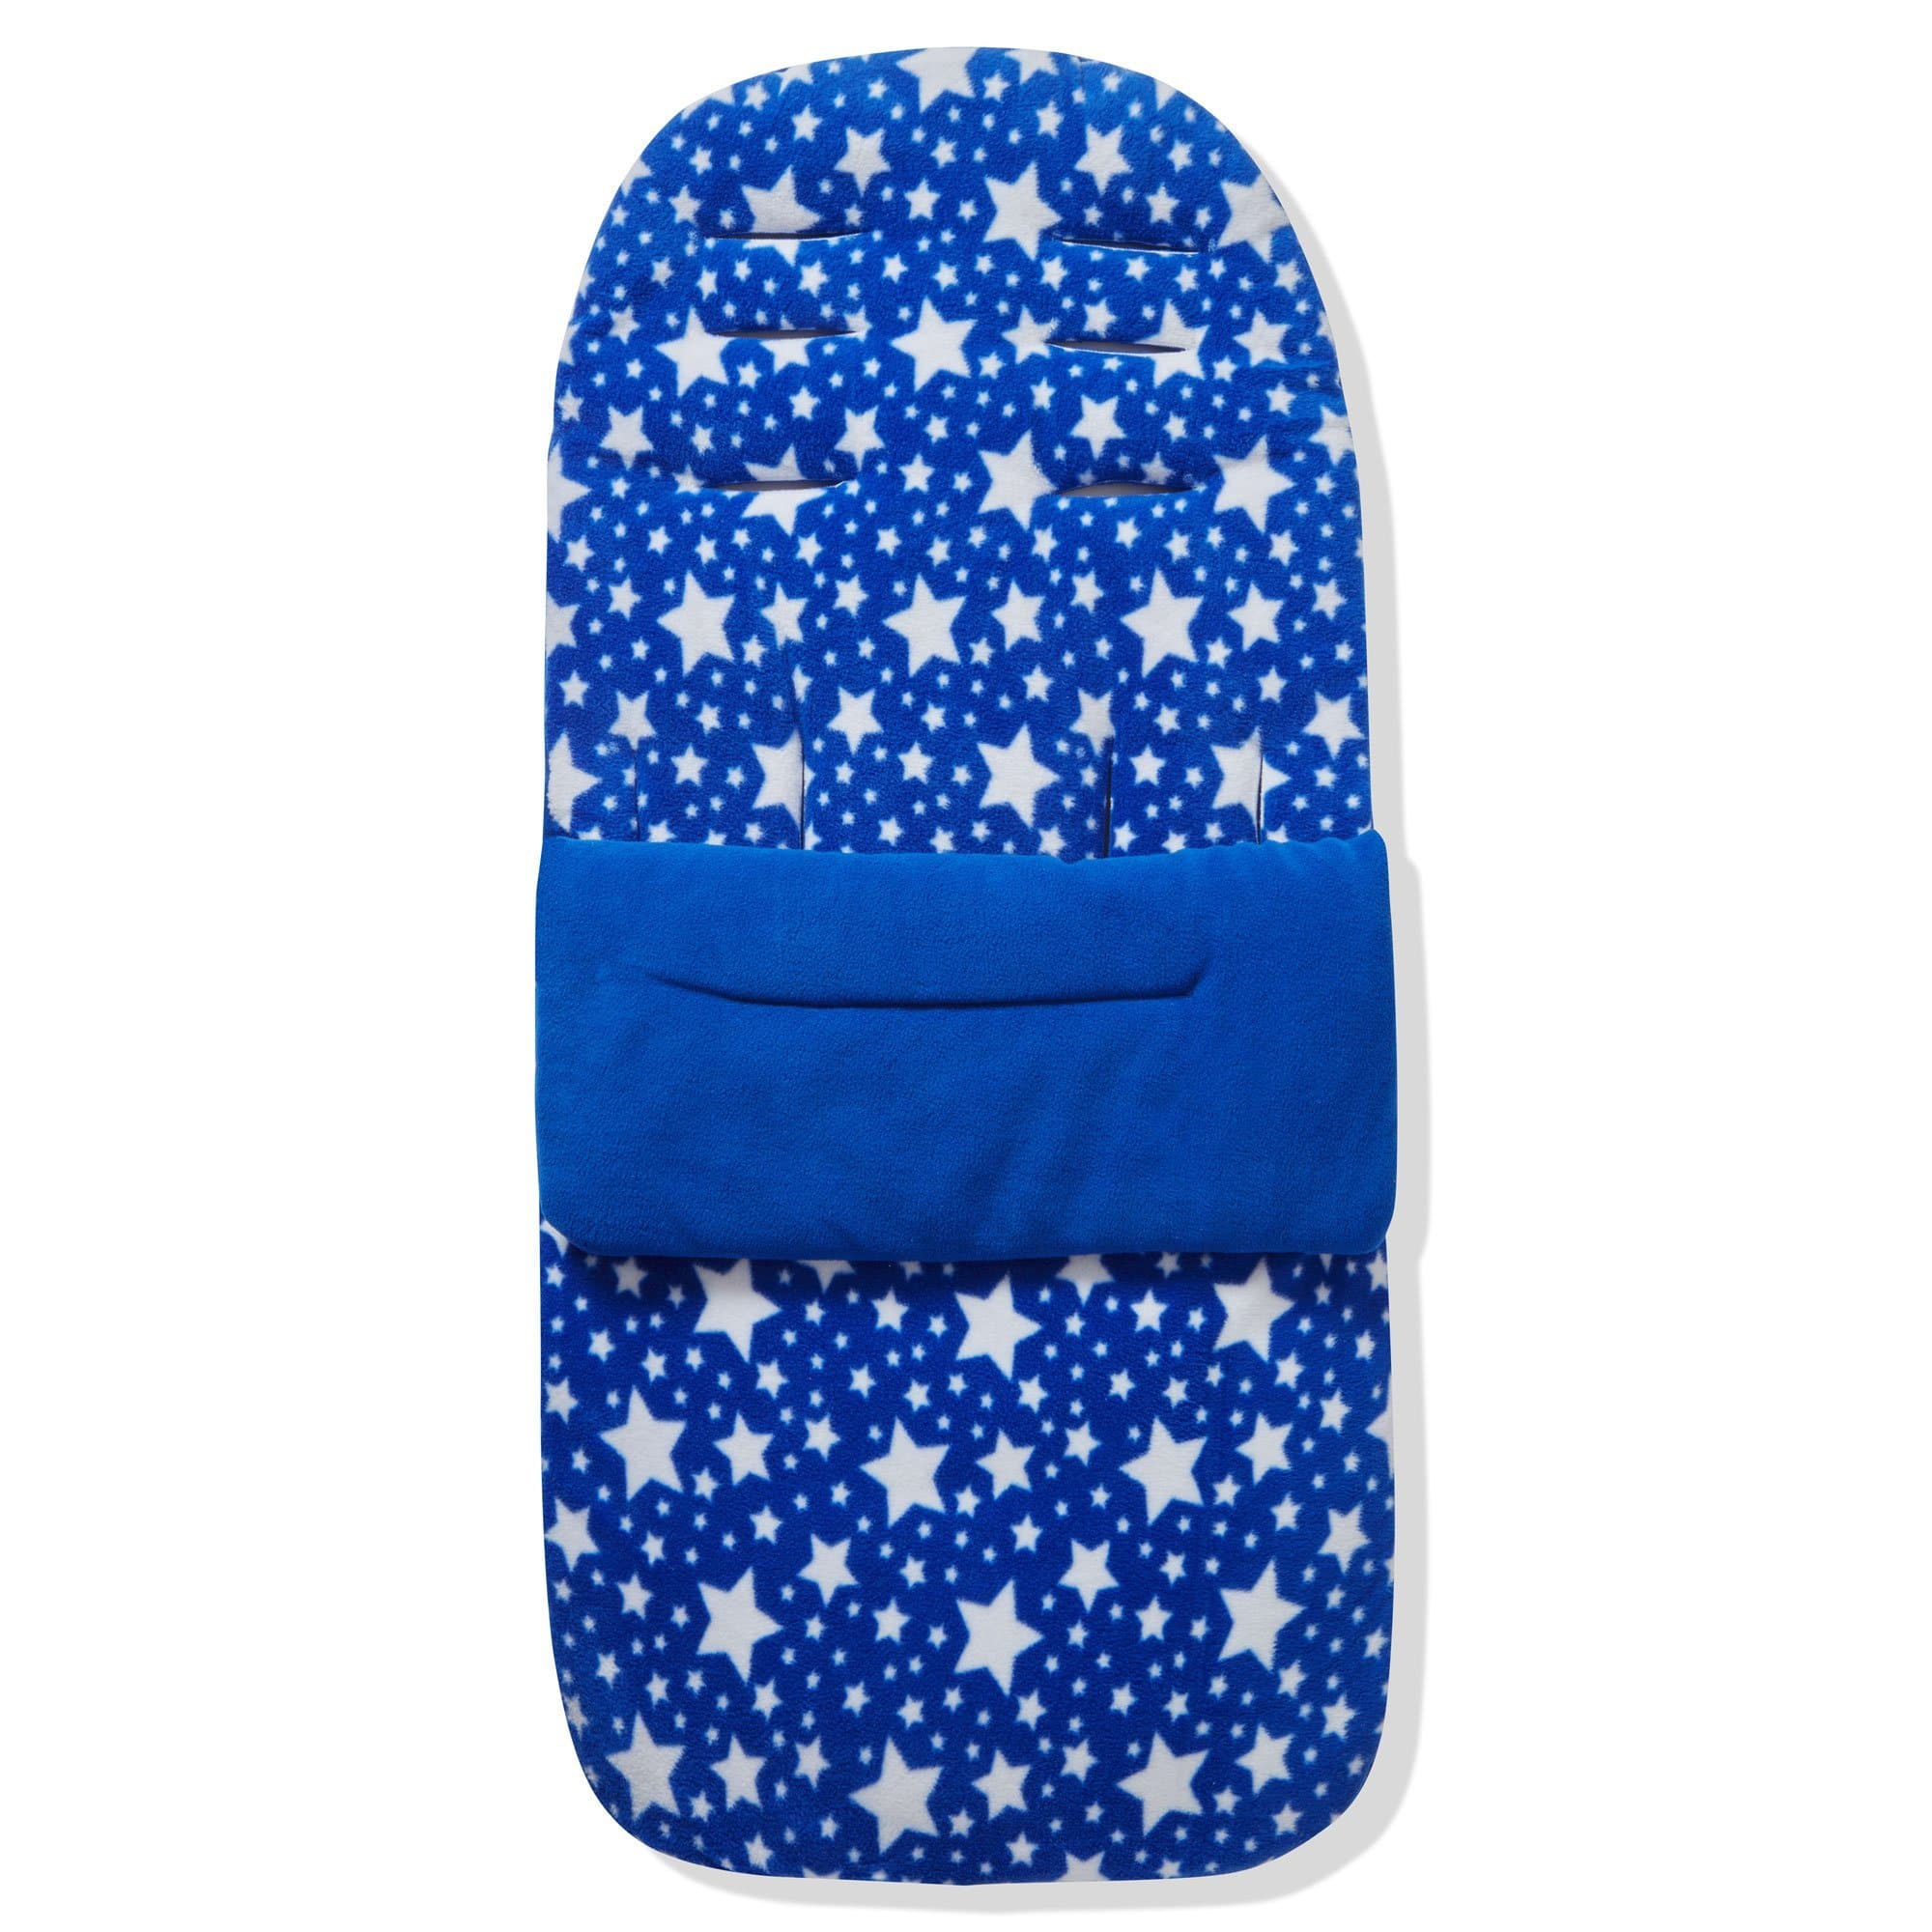 Fleece Footmuff / Cosy Toes Compatible with Venicci - Blue Star / Fits All Models | For Your Little One